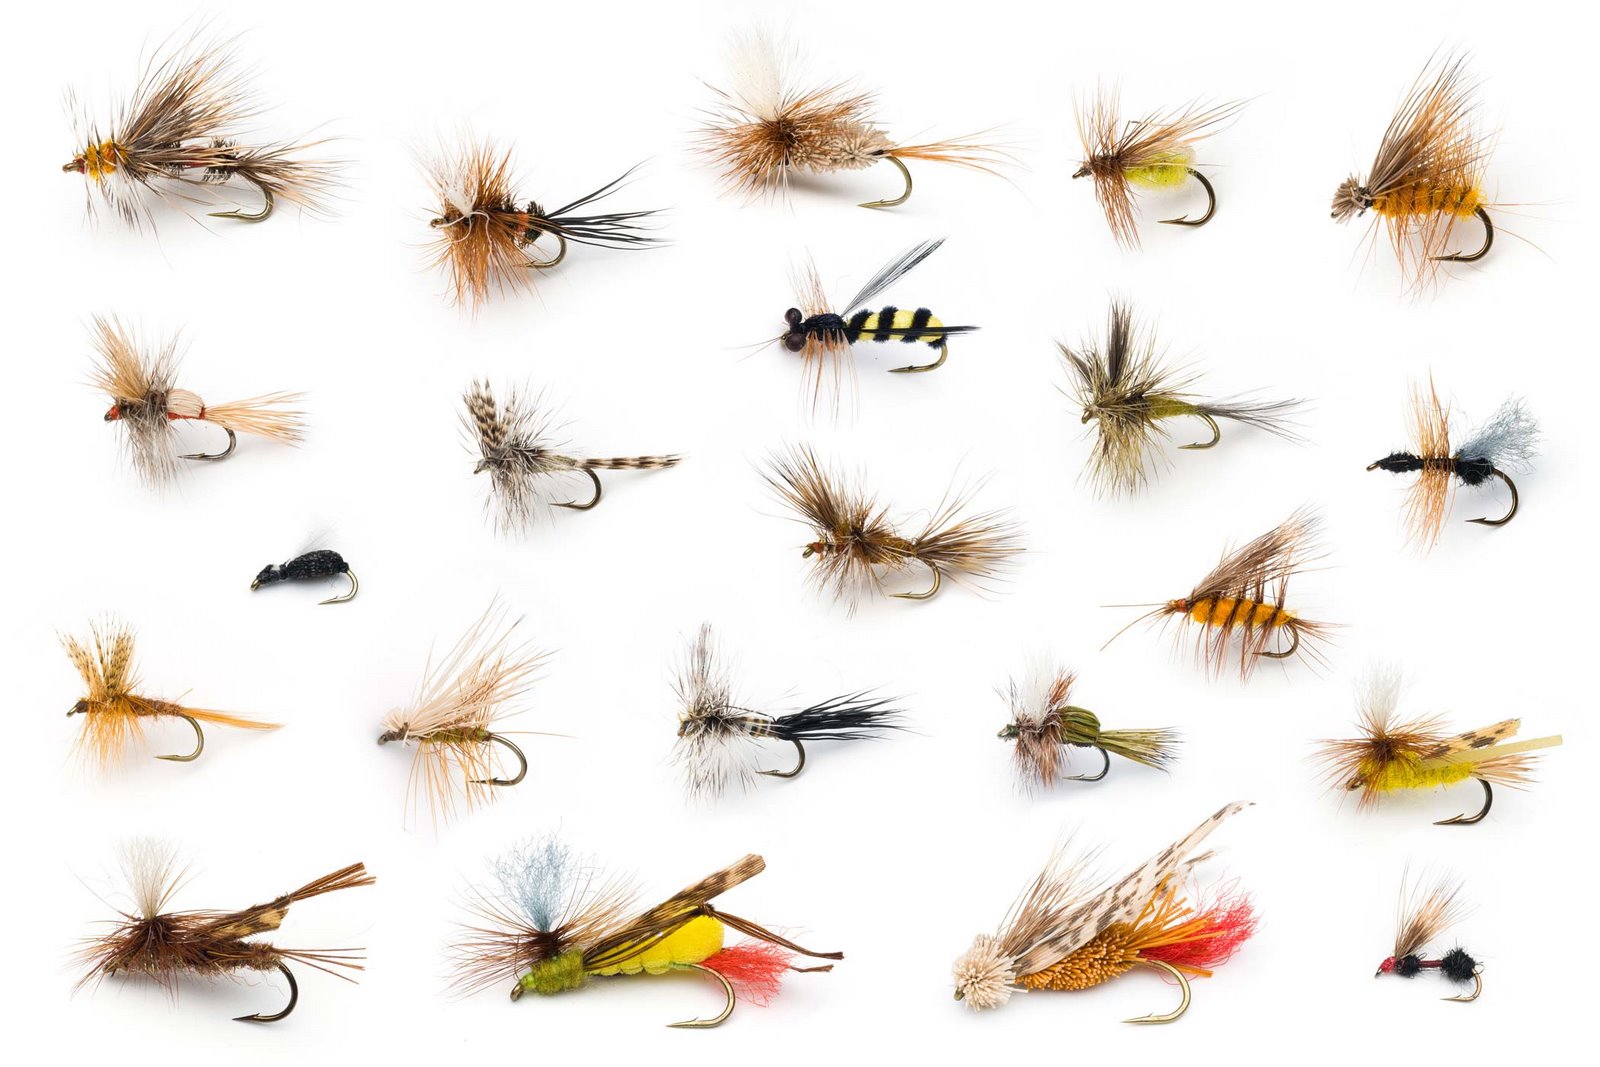 Dry Fly Patterns for Fly Fishing - The Fly Project